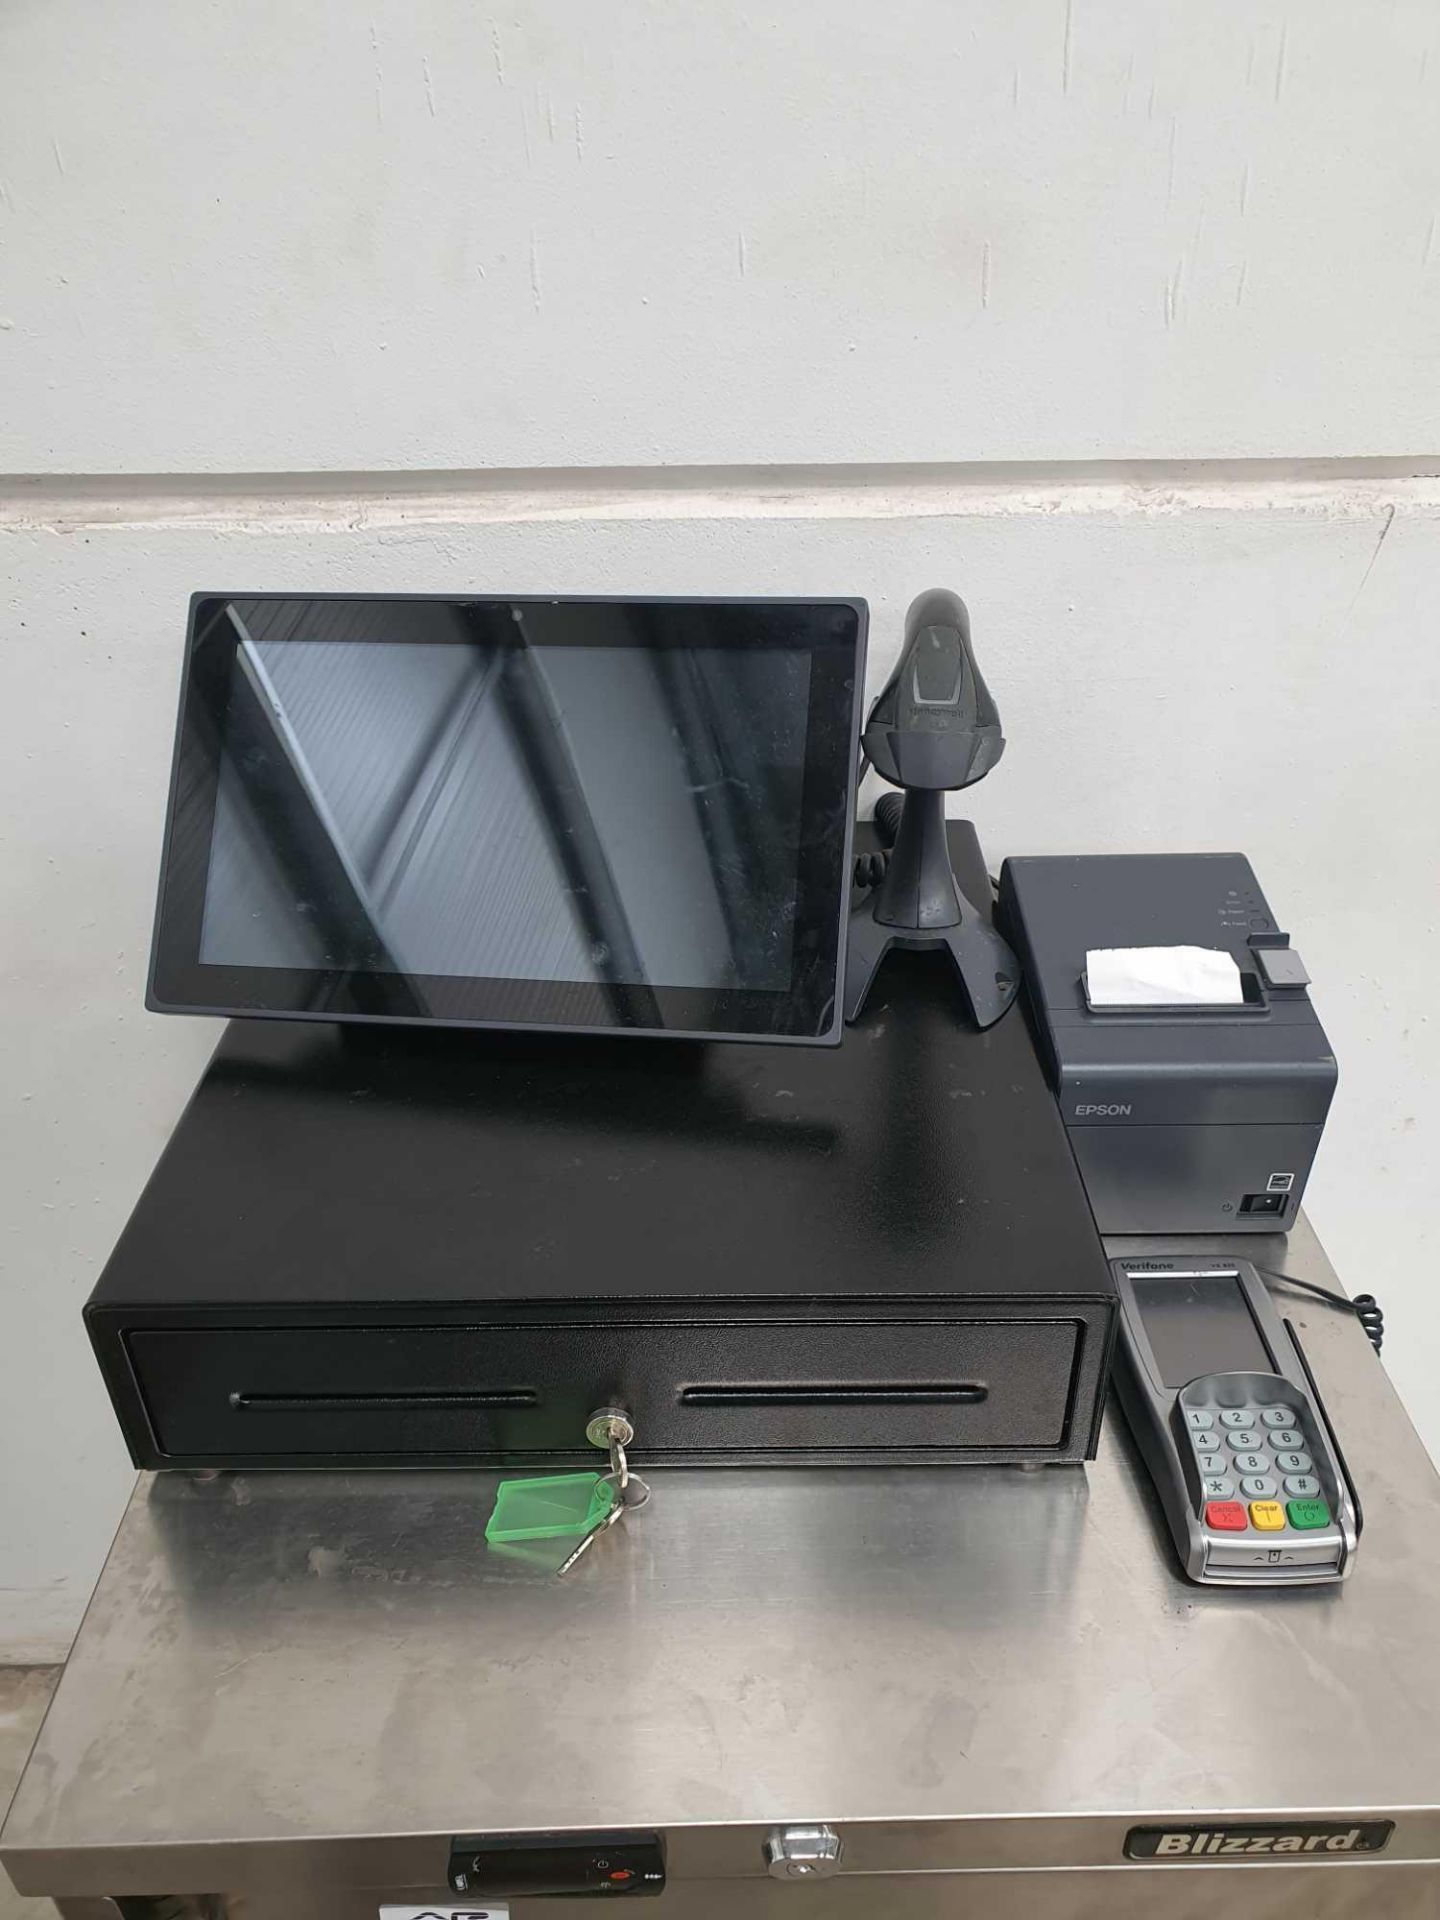 Aures till with card reader and epson printer and honeywell scanner